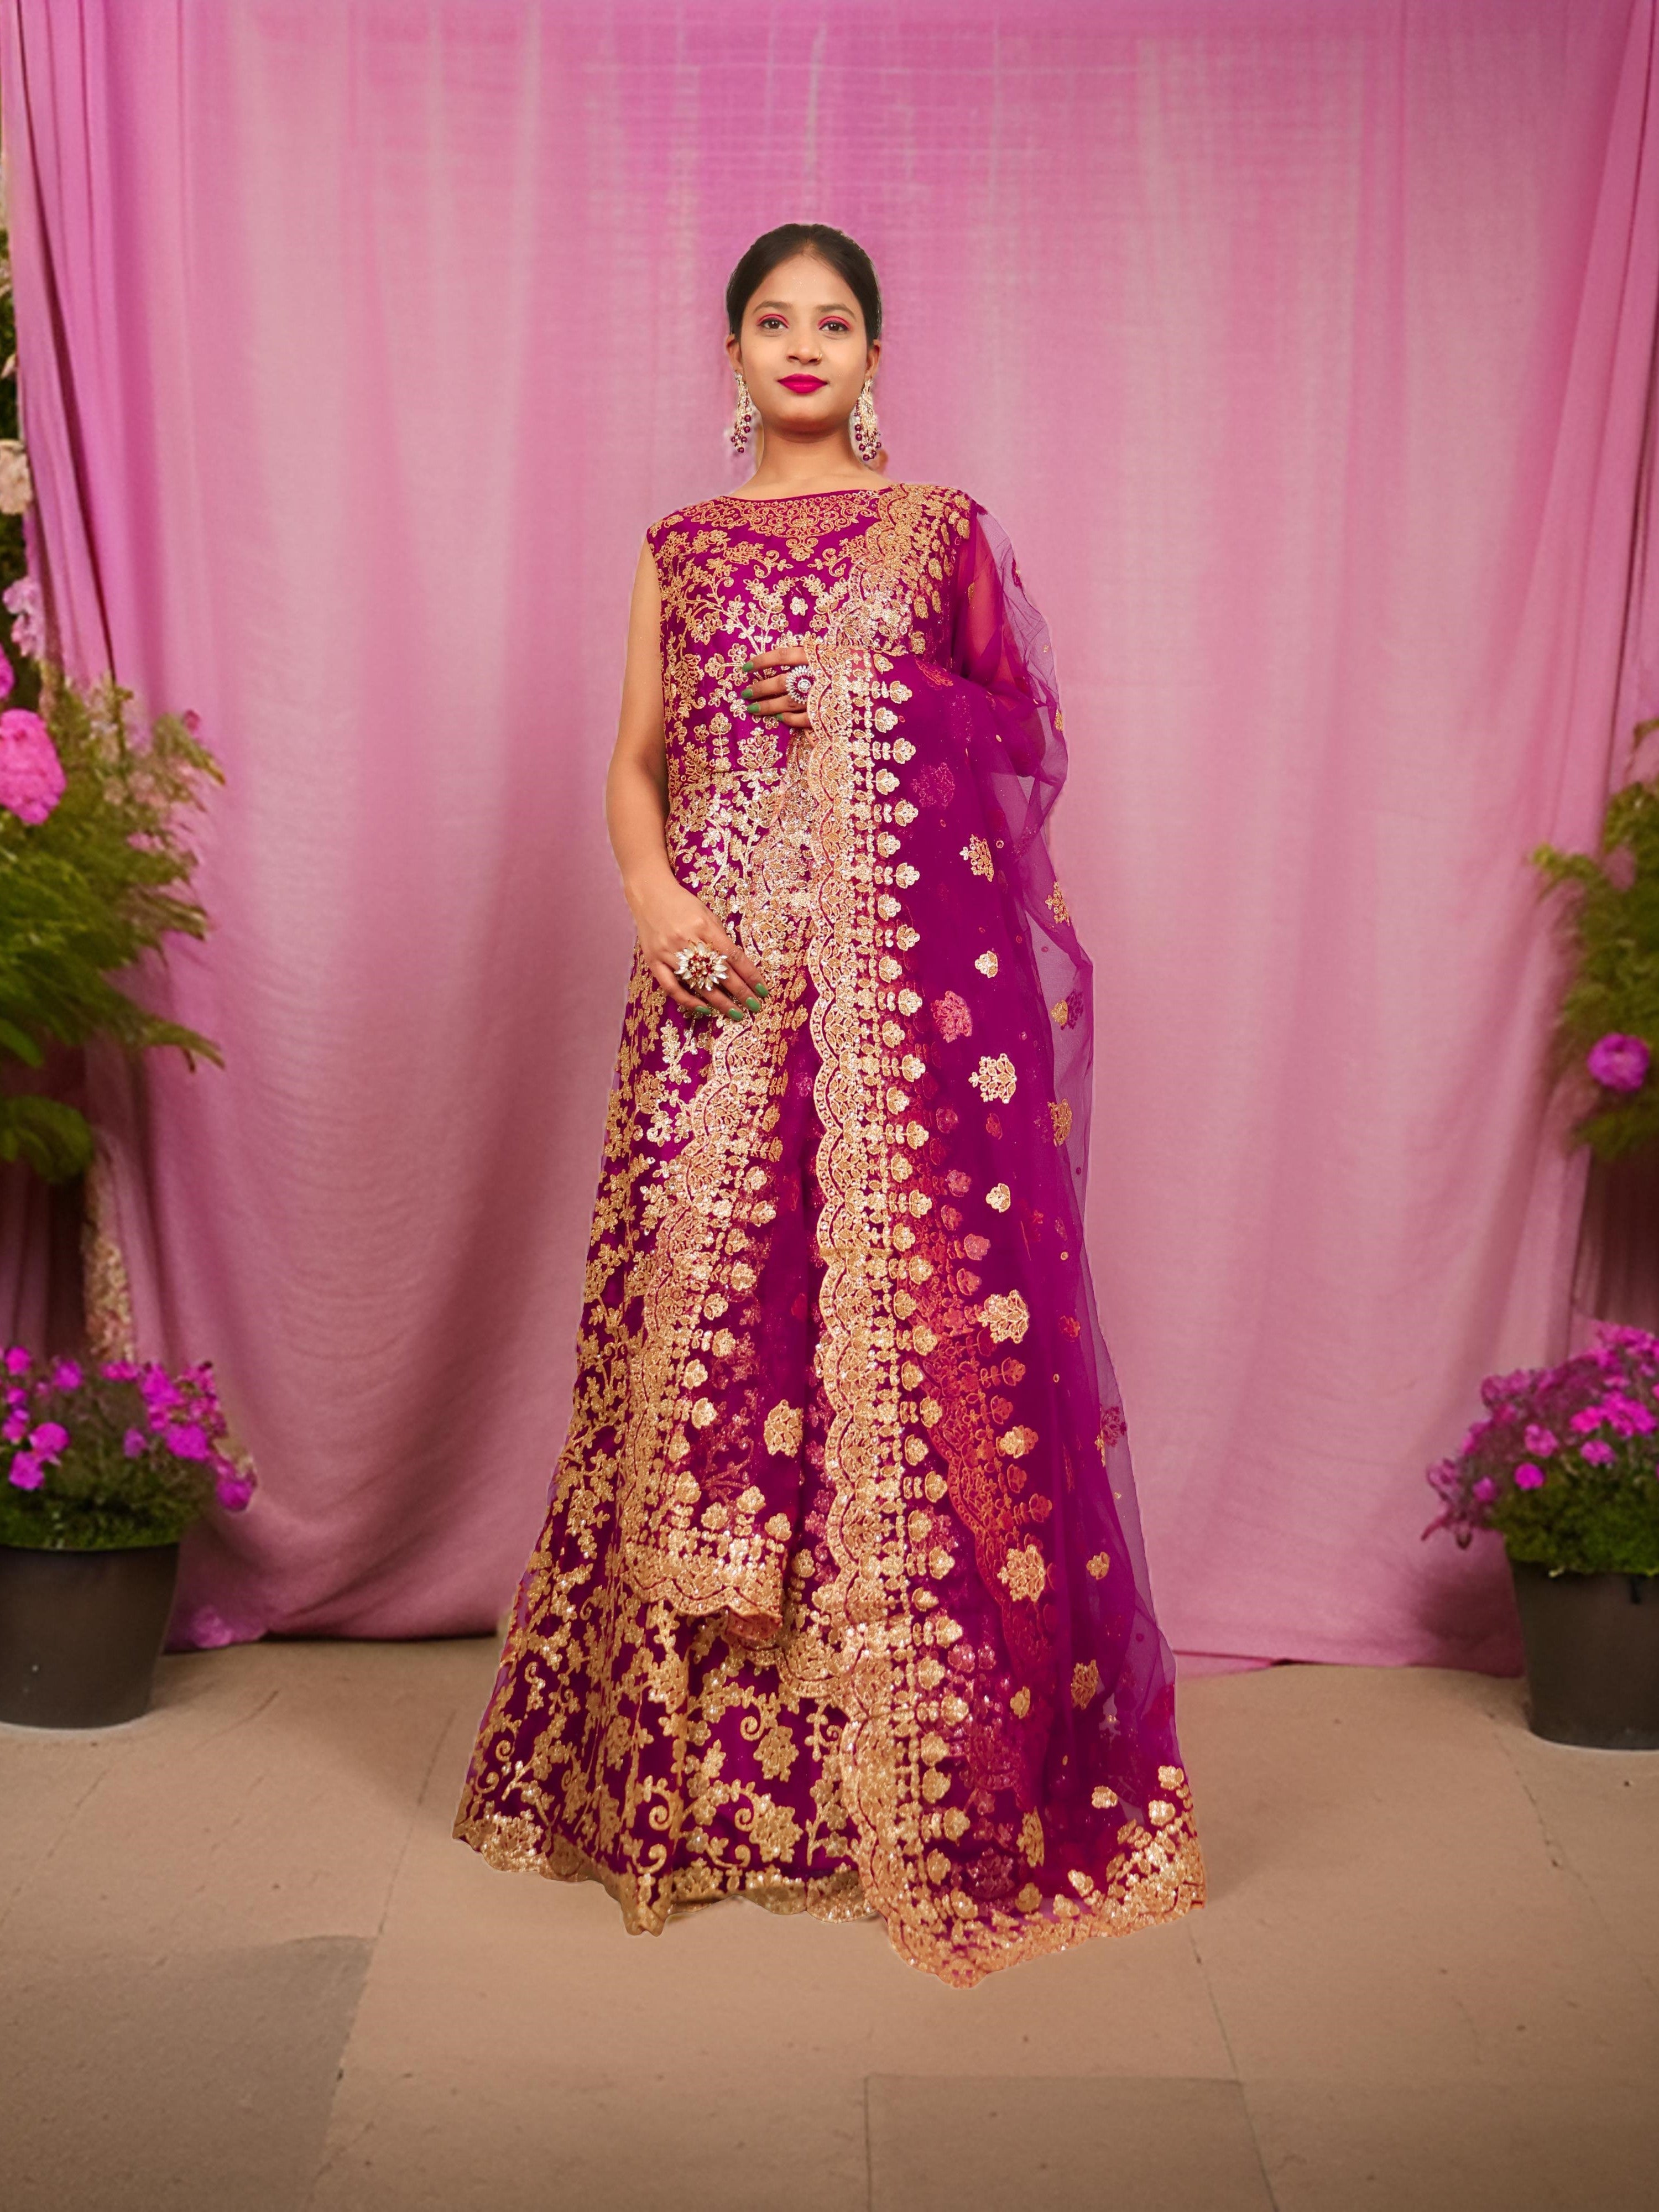 Gown with Shimmery Rubber &amp; Beads Work by Shreekama Purple Designer Gowns for Party Festival Wedding Occasion in Noida